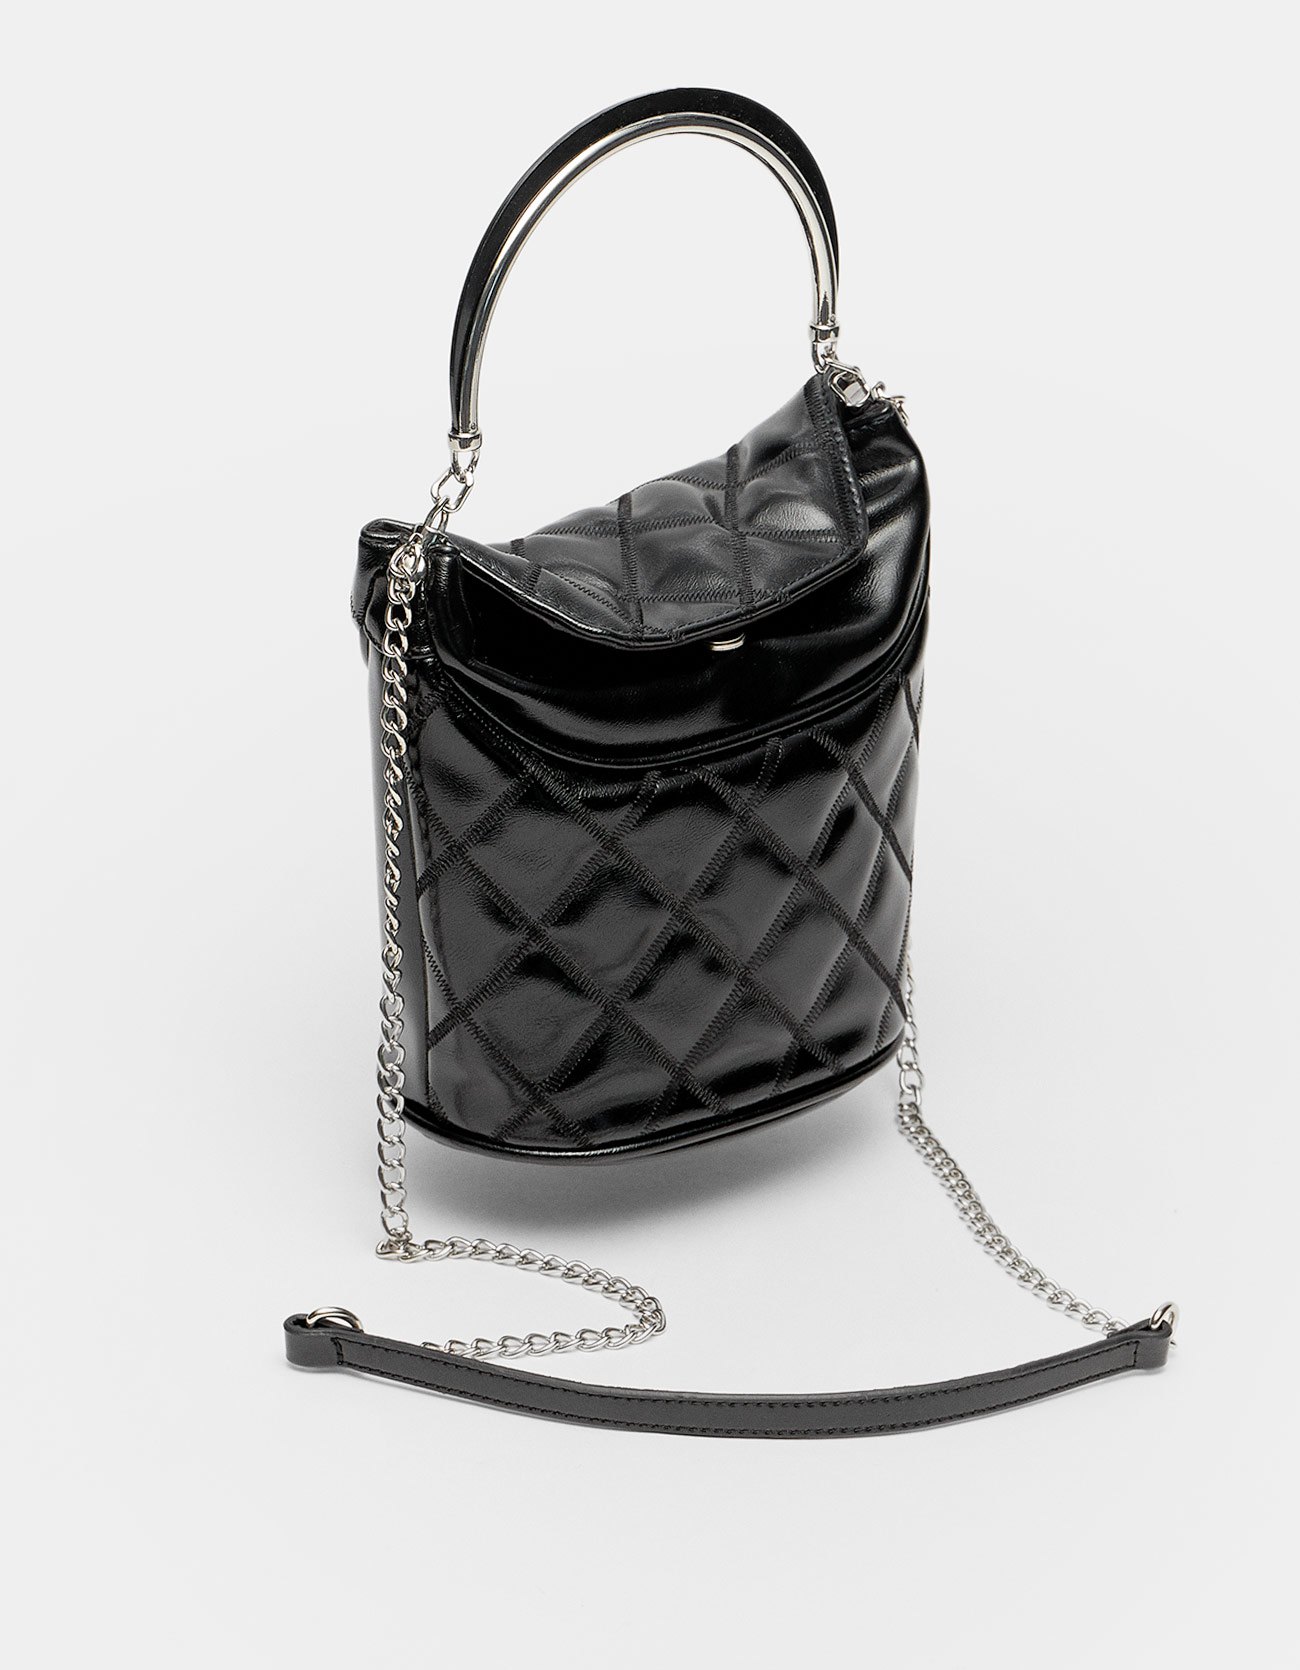 mediakits.theygsgroup.com - Stradivarius Quilted crossbody bag with chain strap